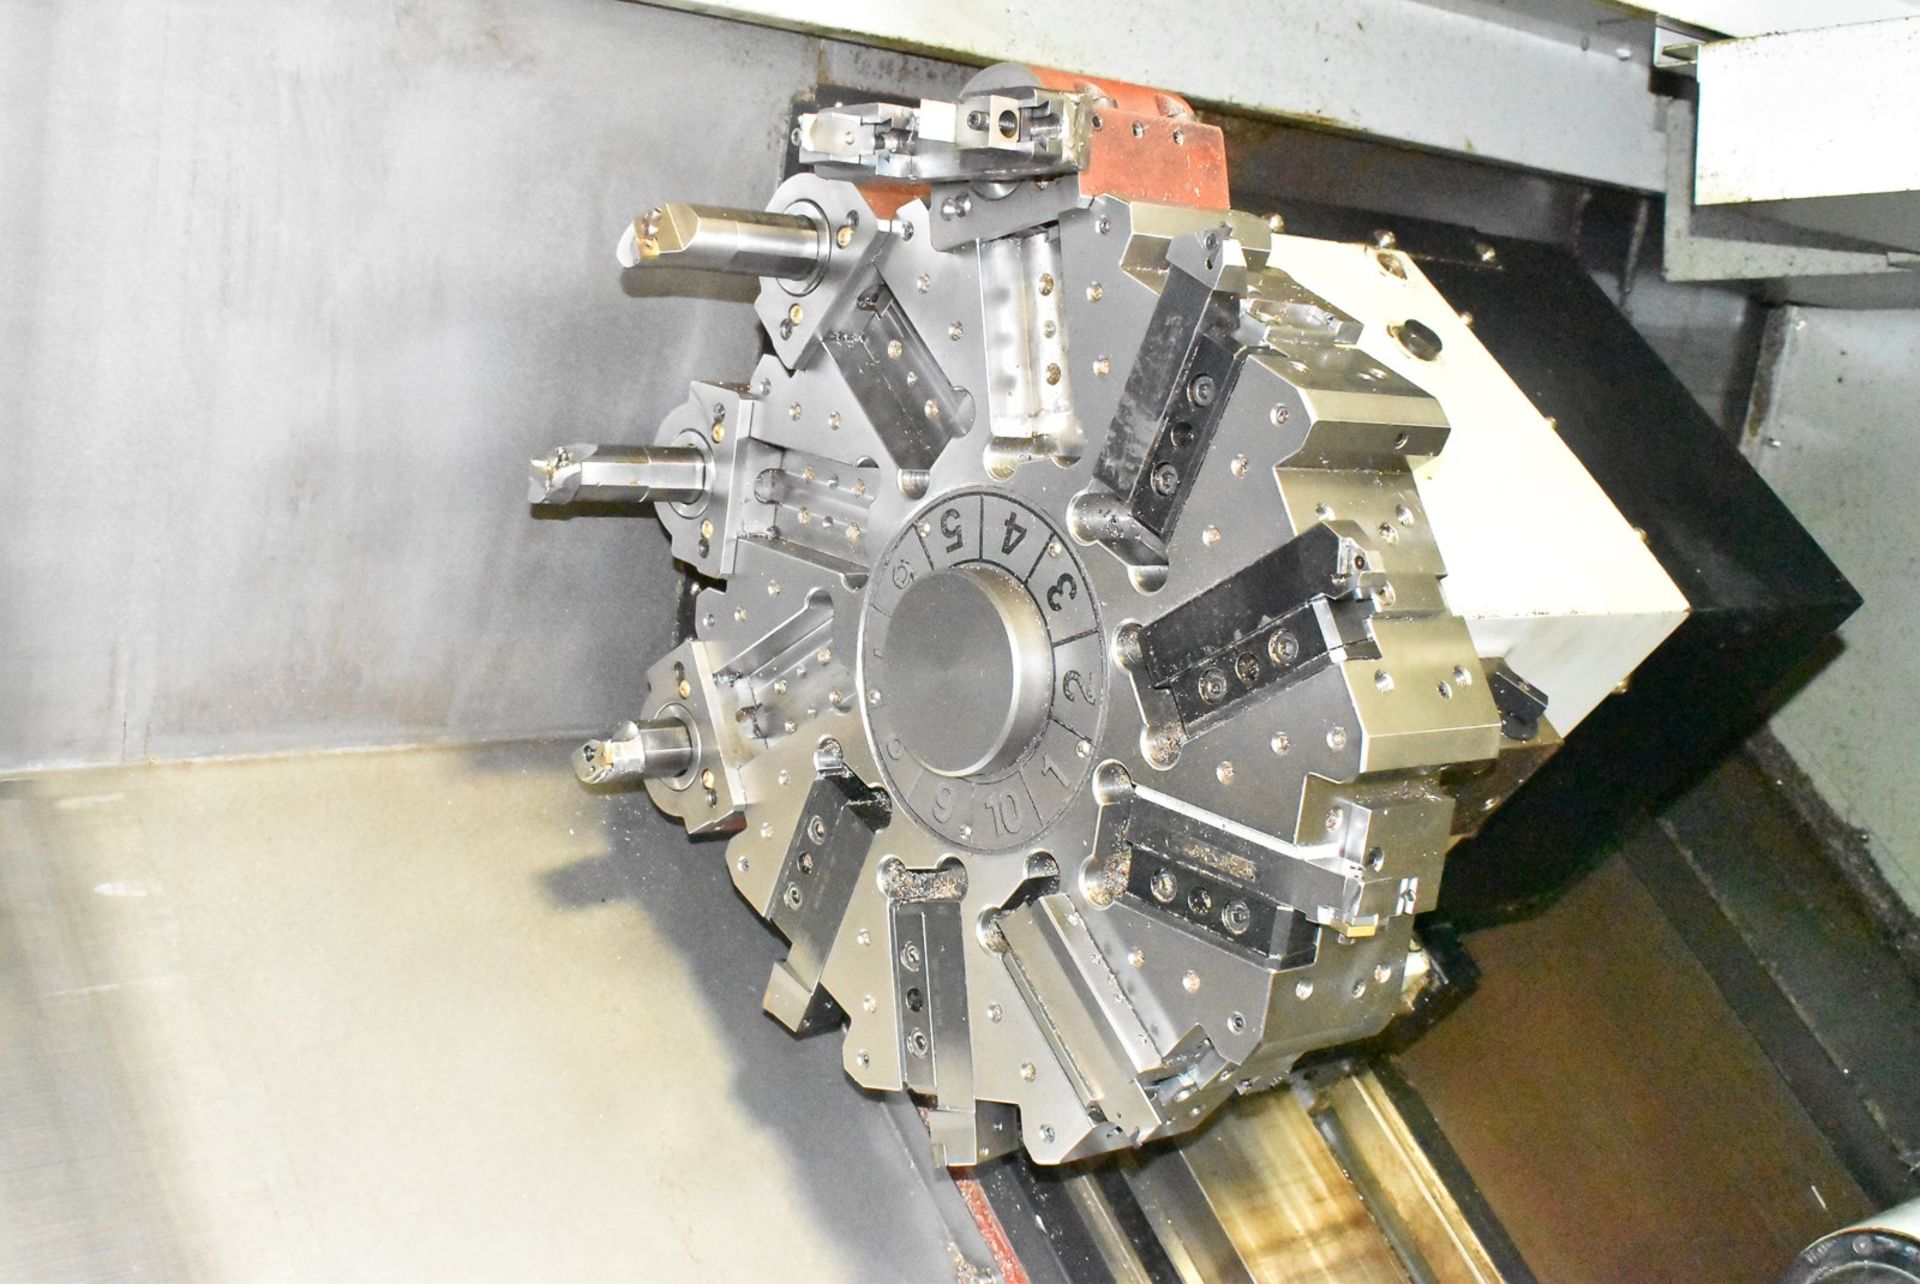 21.65"x35" Victor (Fortune) Mdl VTURN-36 2-Axis CNC Turning Center Lathe, S/N MD-1636, New 2007 - Image 6 of 10